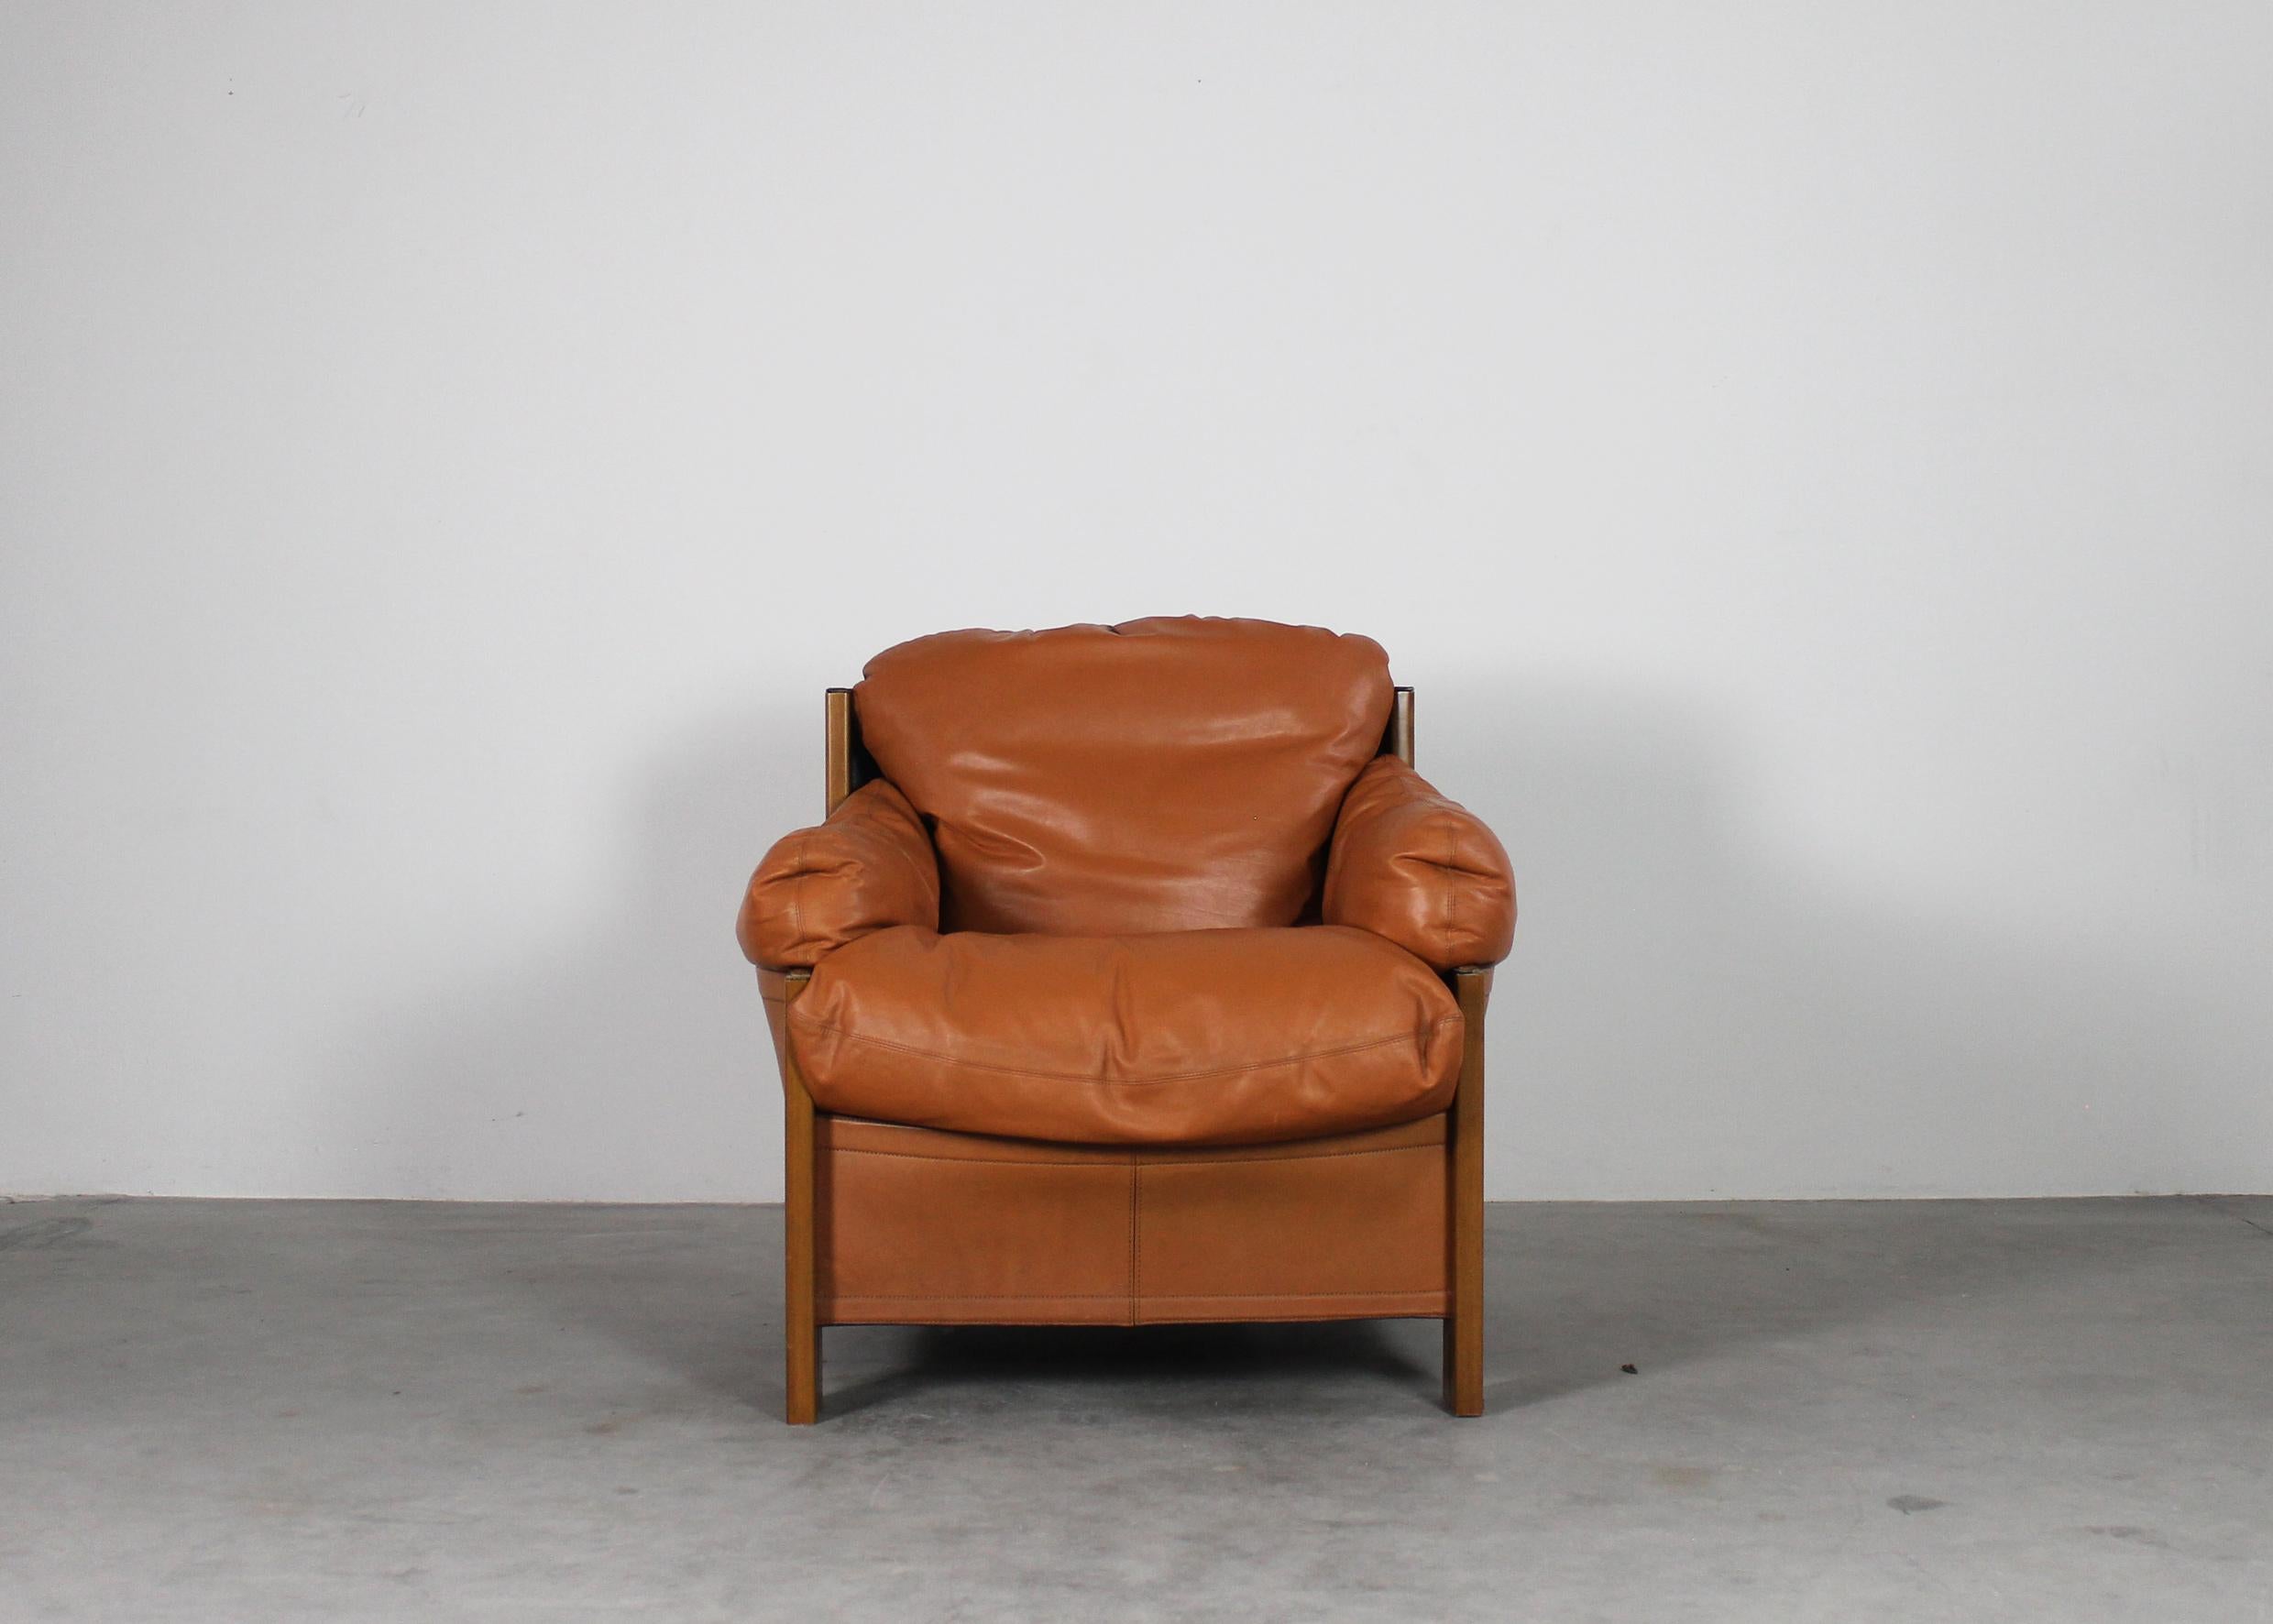 A single armchair with a frame in wood and cushions upholstery with leather (cognac shade) designed by Tobia and Afra Scarpa and manufactured by Maxalto from the Artona series 1975 ca. 

Tobia Scarpa and his wife Afra Bianchin began their long